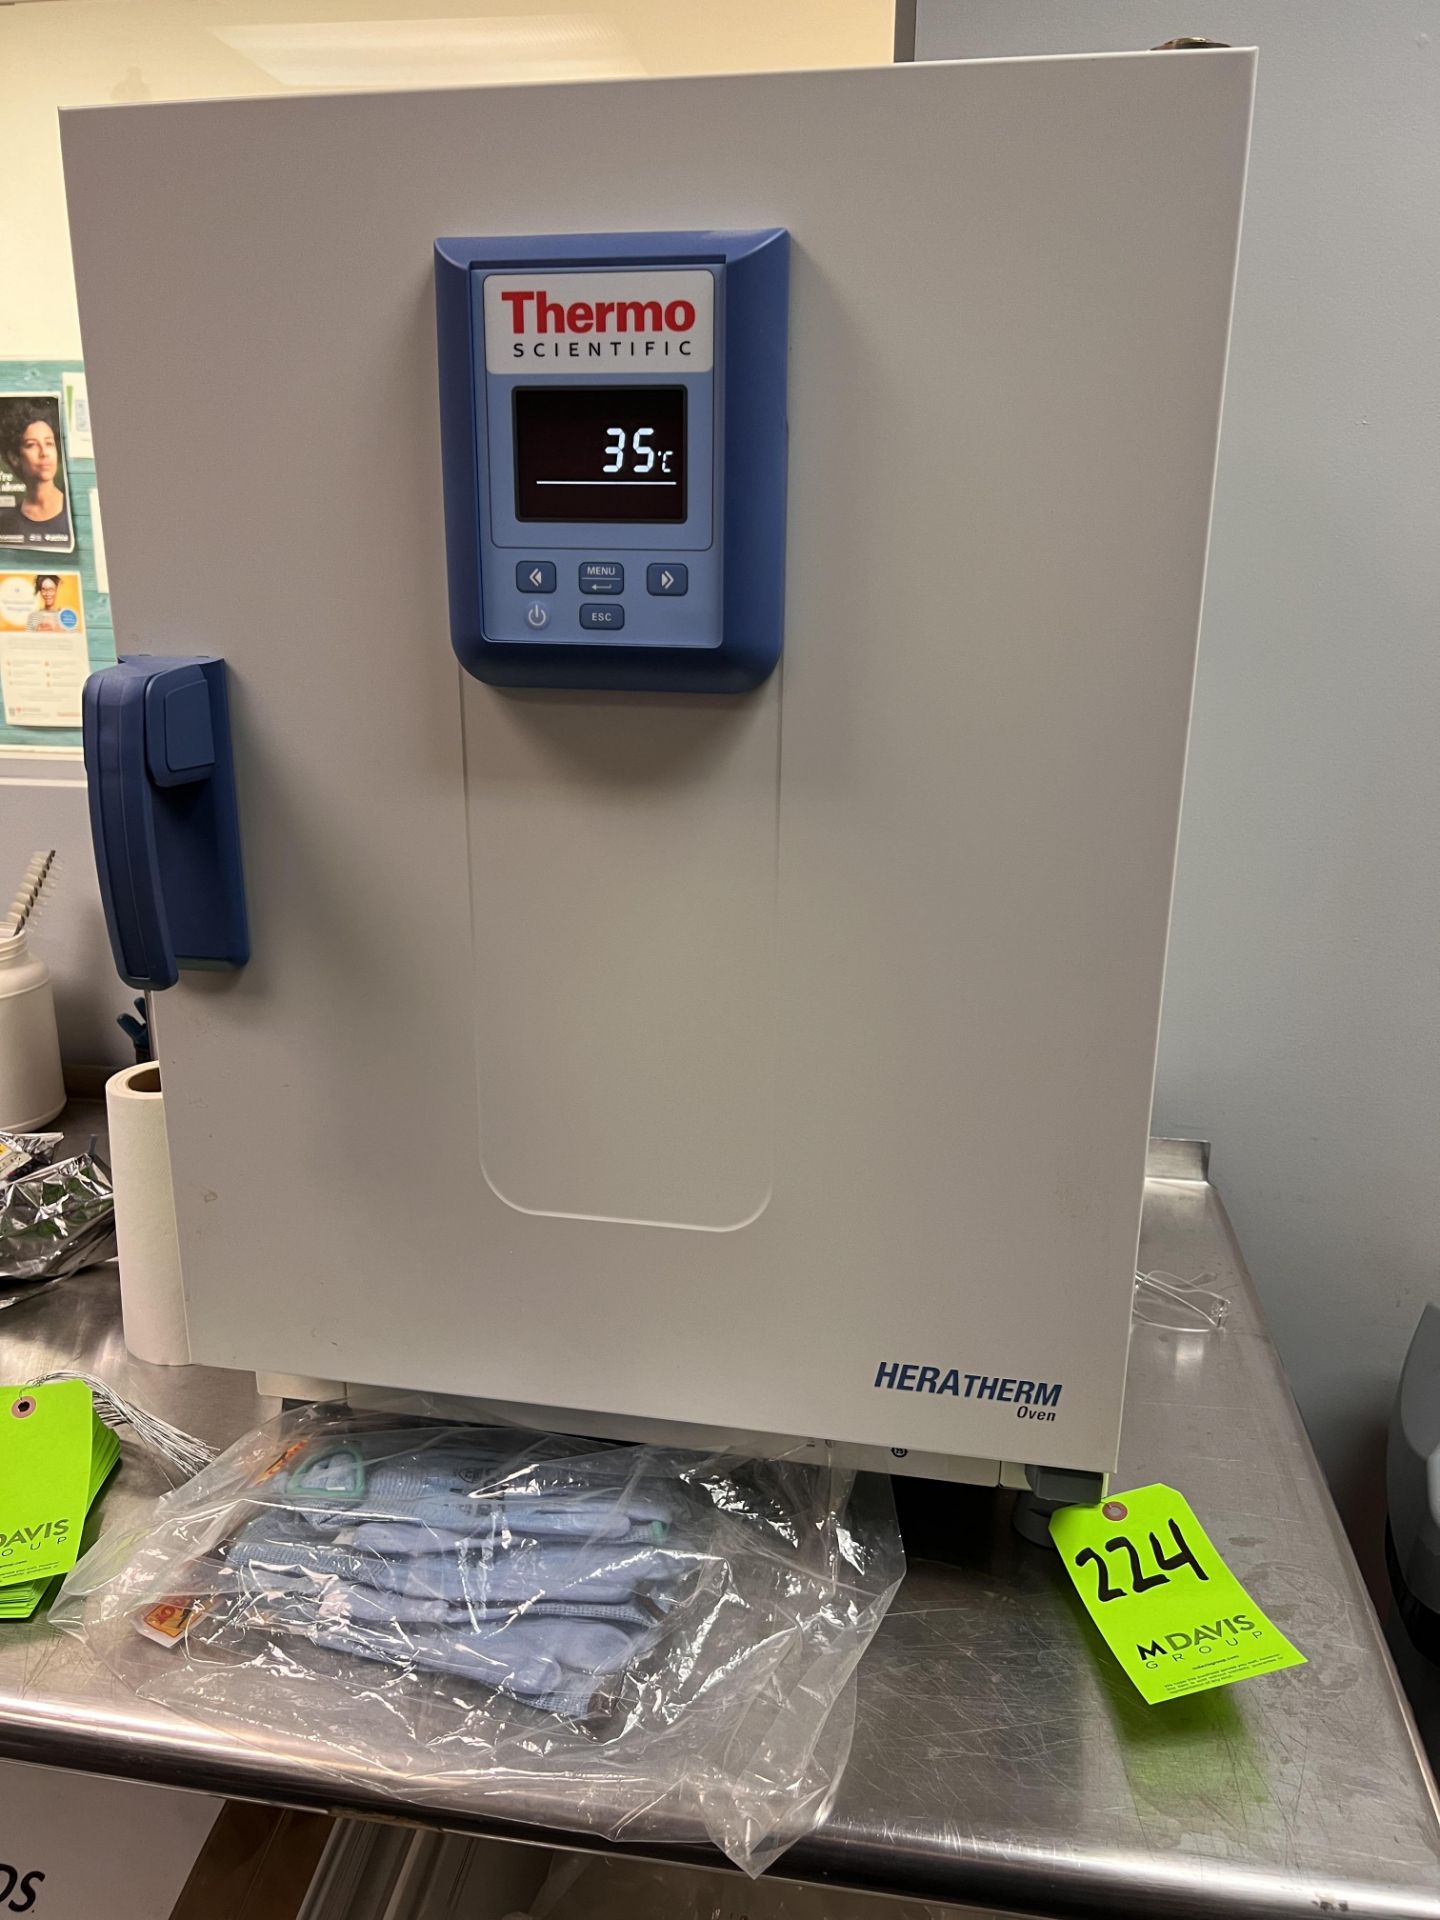 2021 THERMO SCIENTIFIC HERATHERM OGS60 LAB OVEN, MODEL HERATHERM OGS60, S/N 42814402